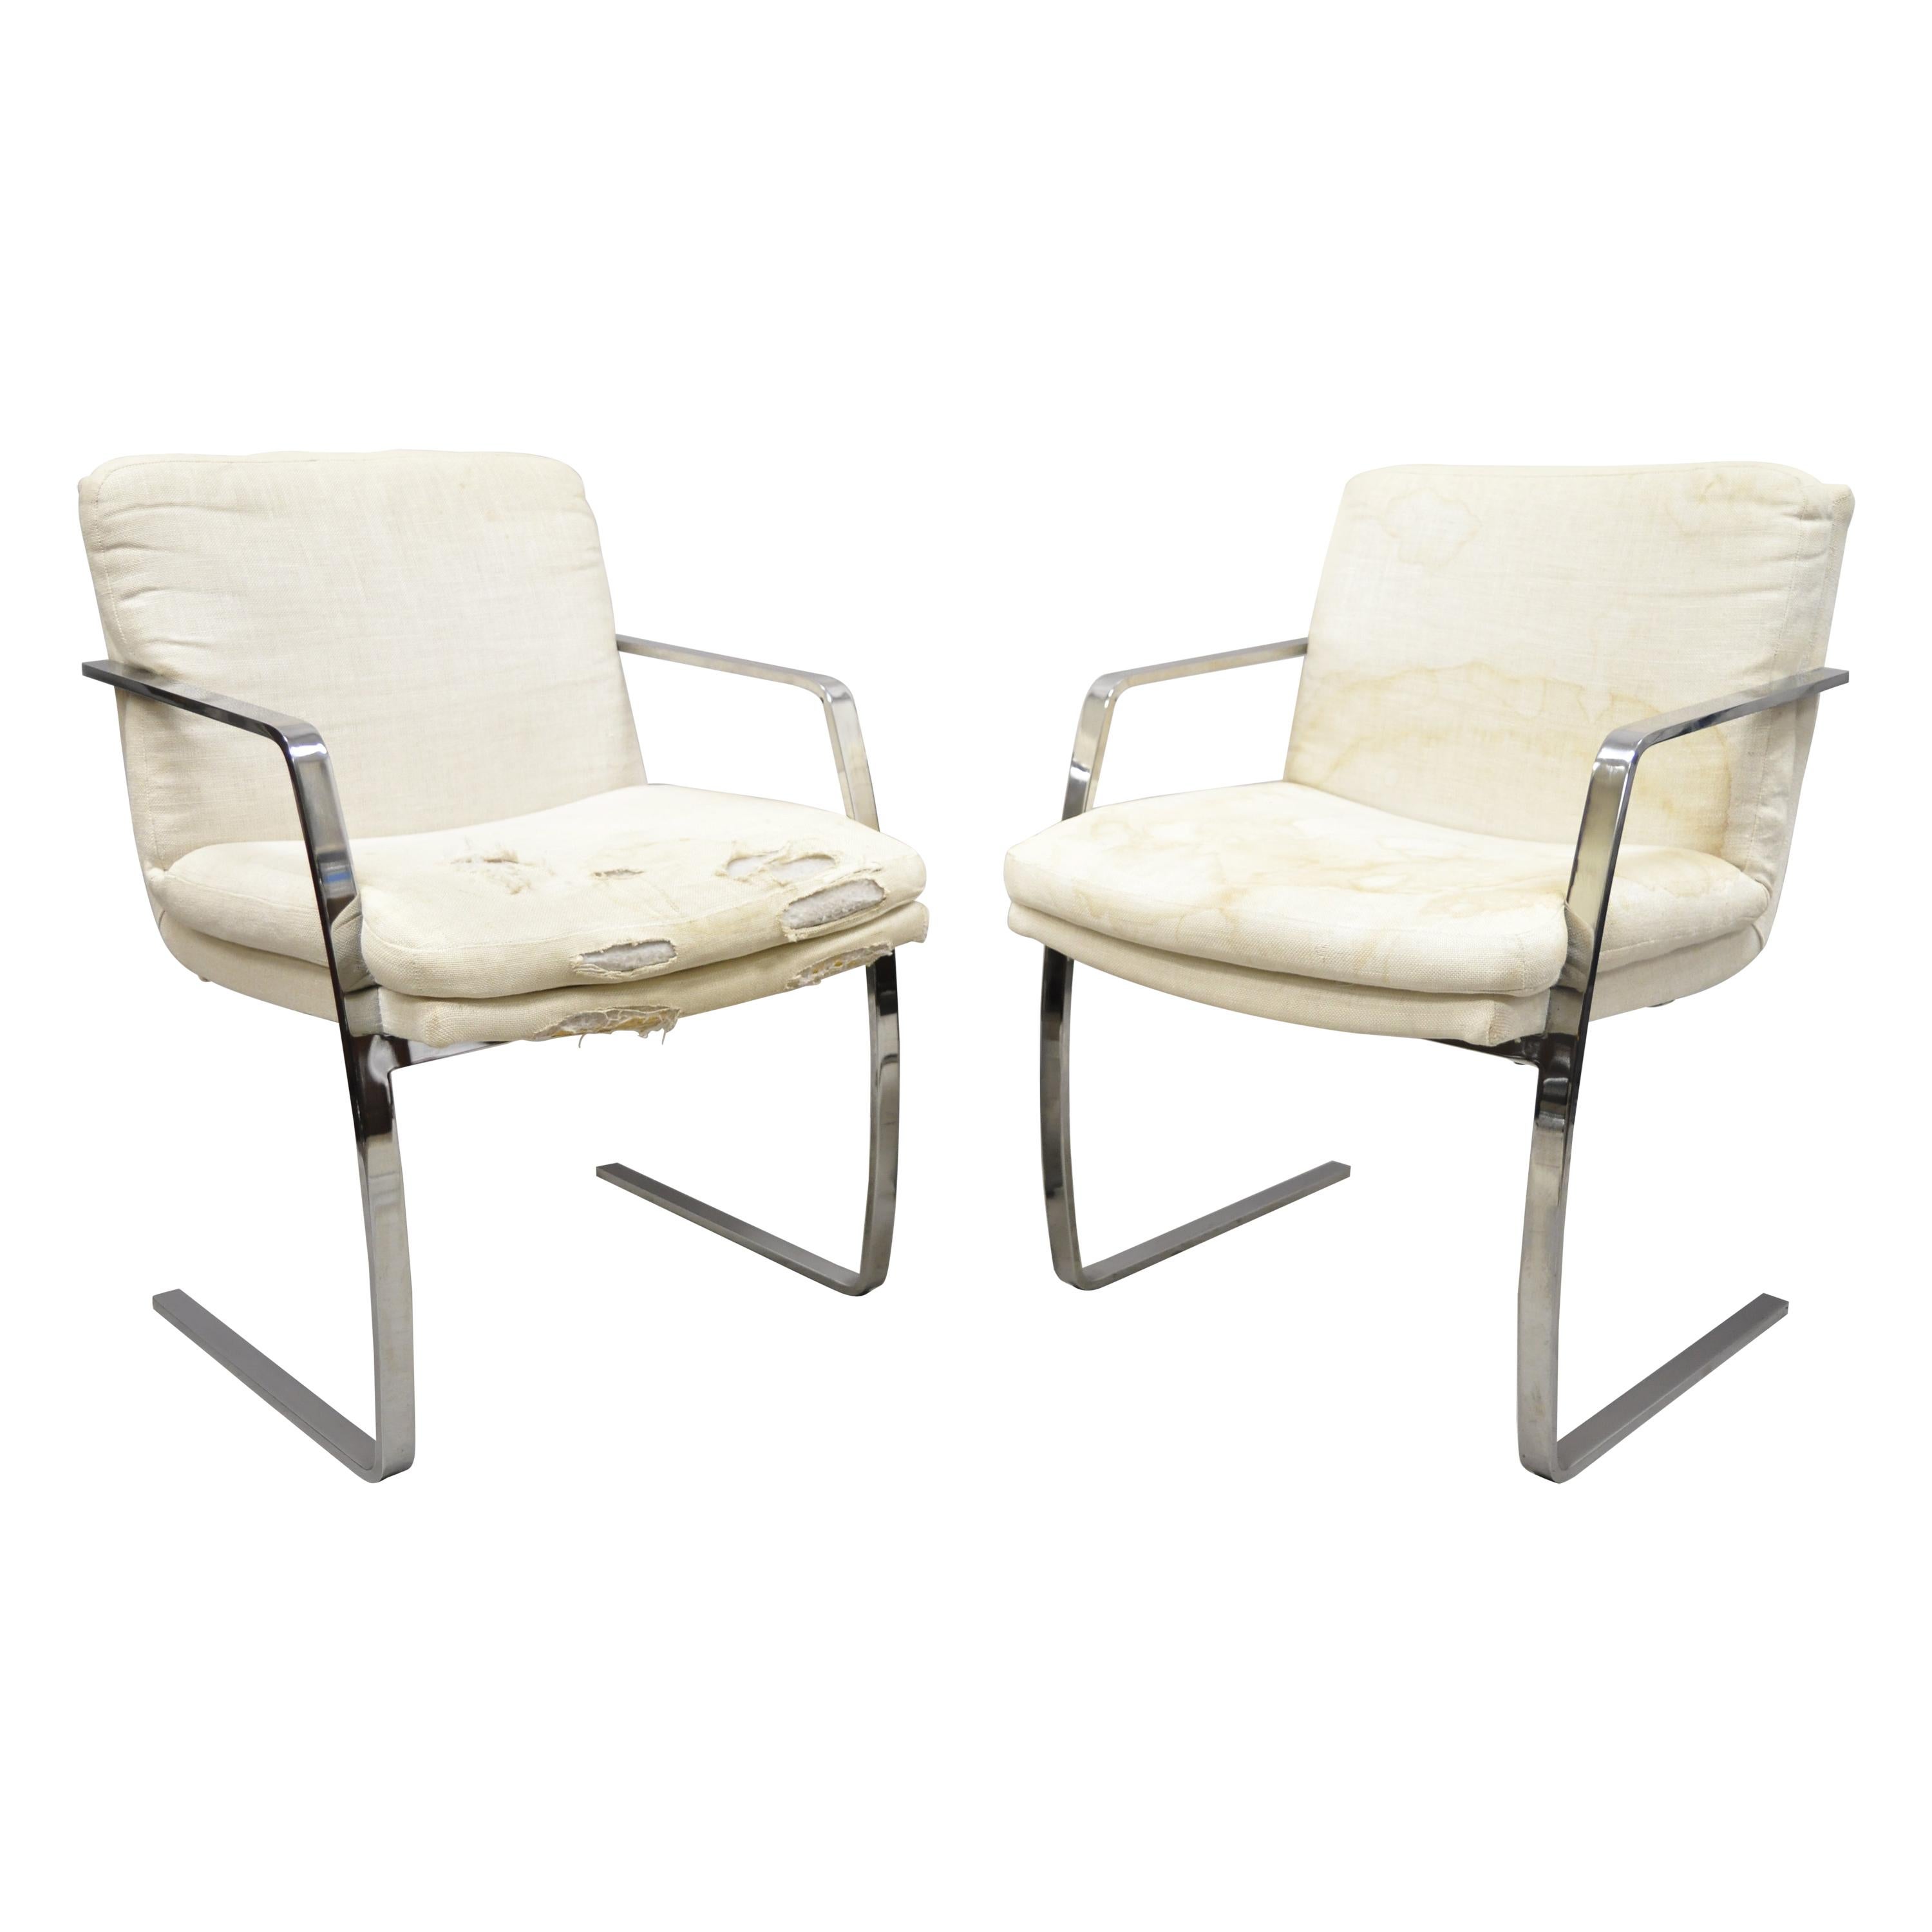 Mid-Century Modern BRNO Style Chrome Cantilever Lounge Armchairs 'C', a Pair